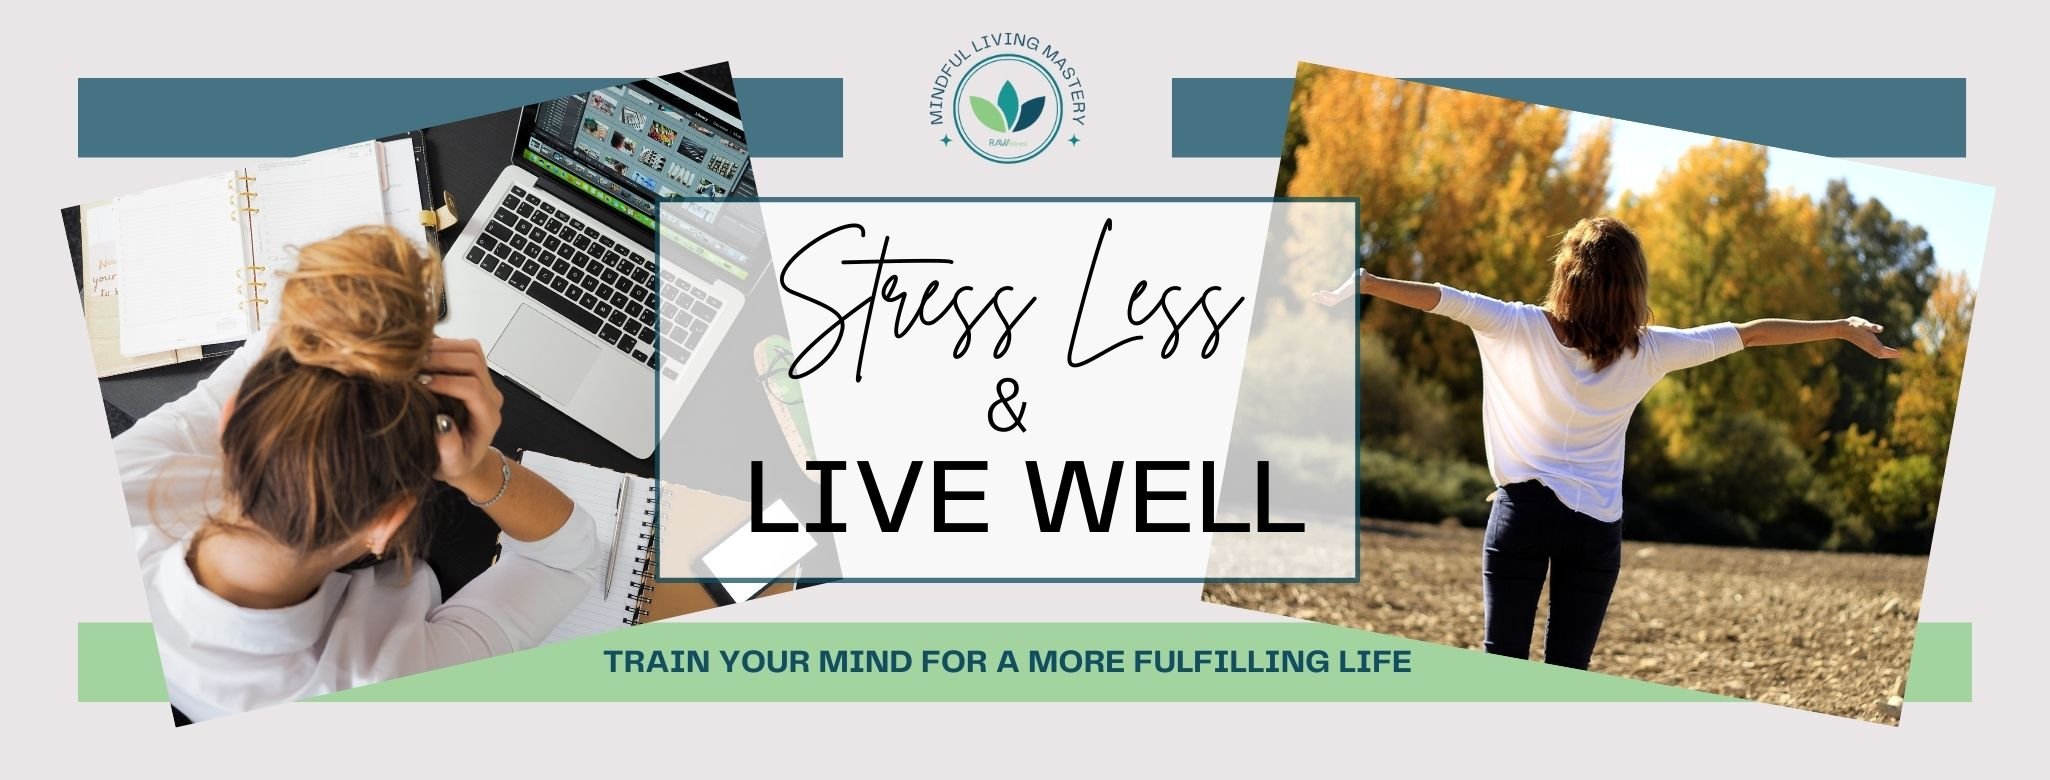 Stress Less and Be Present In your Life - Join the Community Banner on Raw Wellness Website